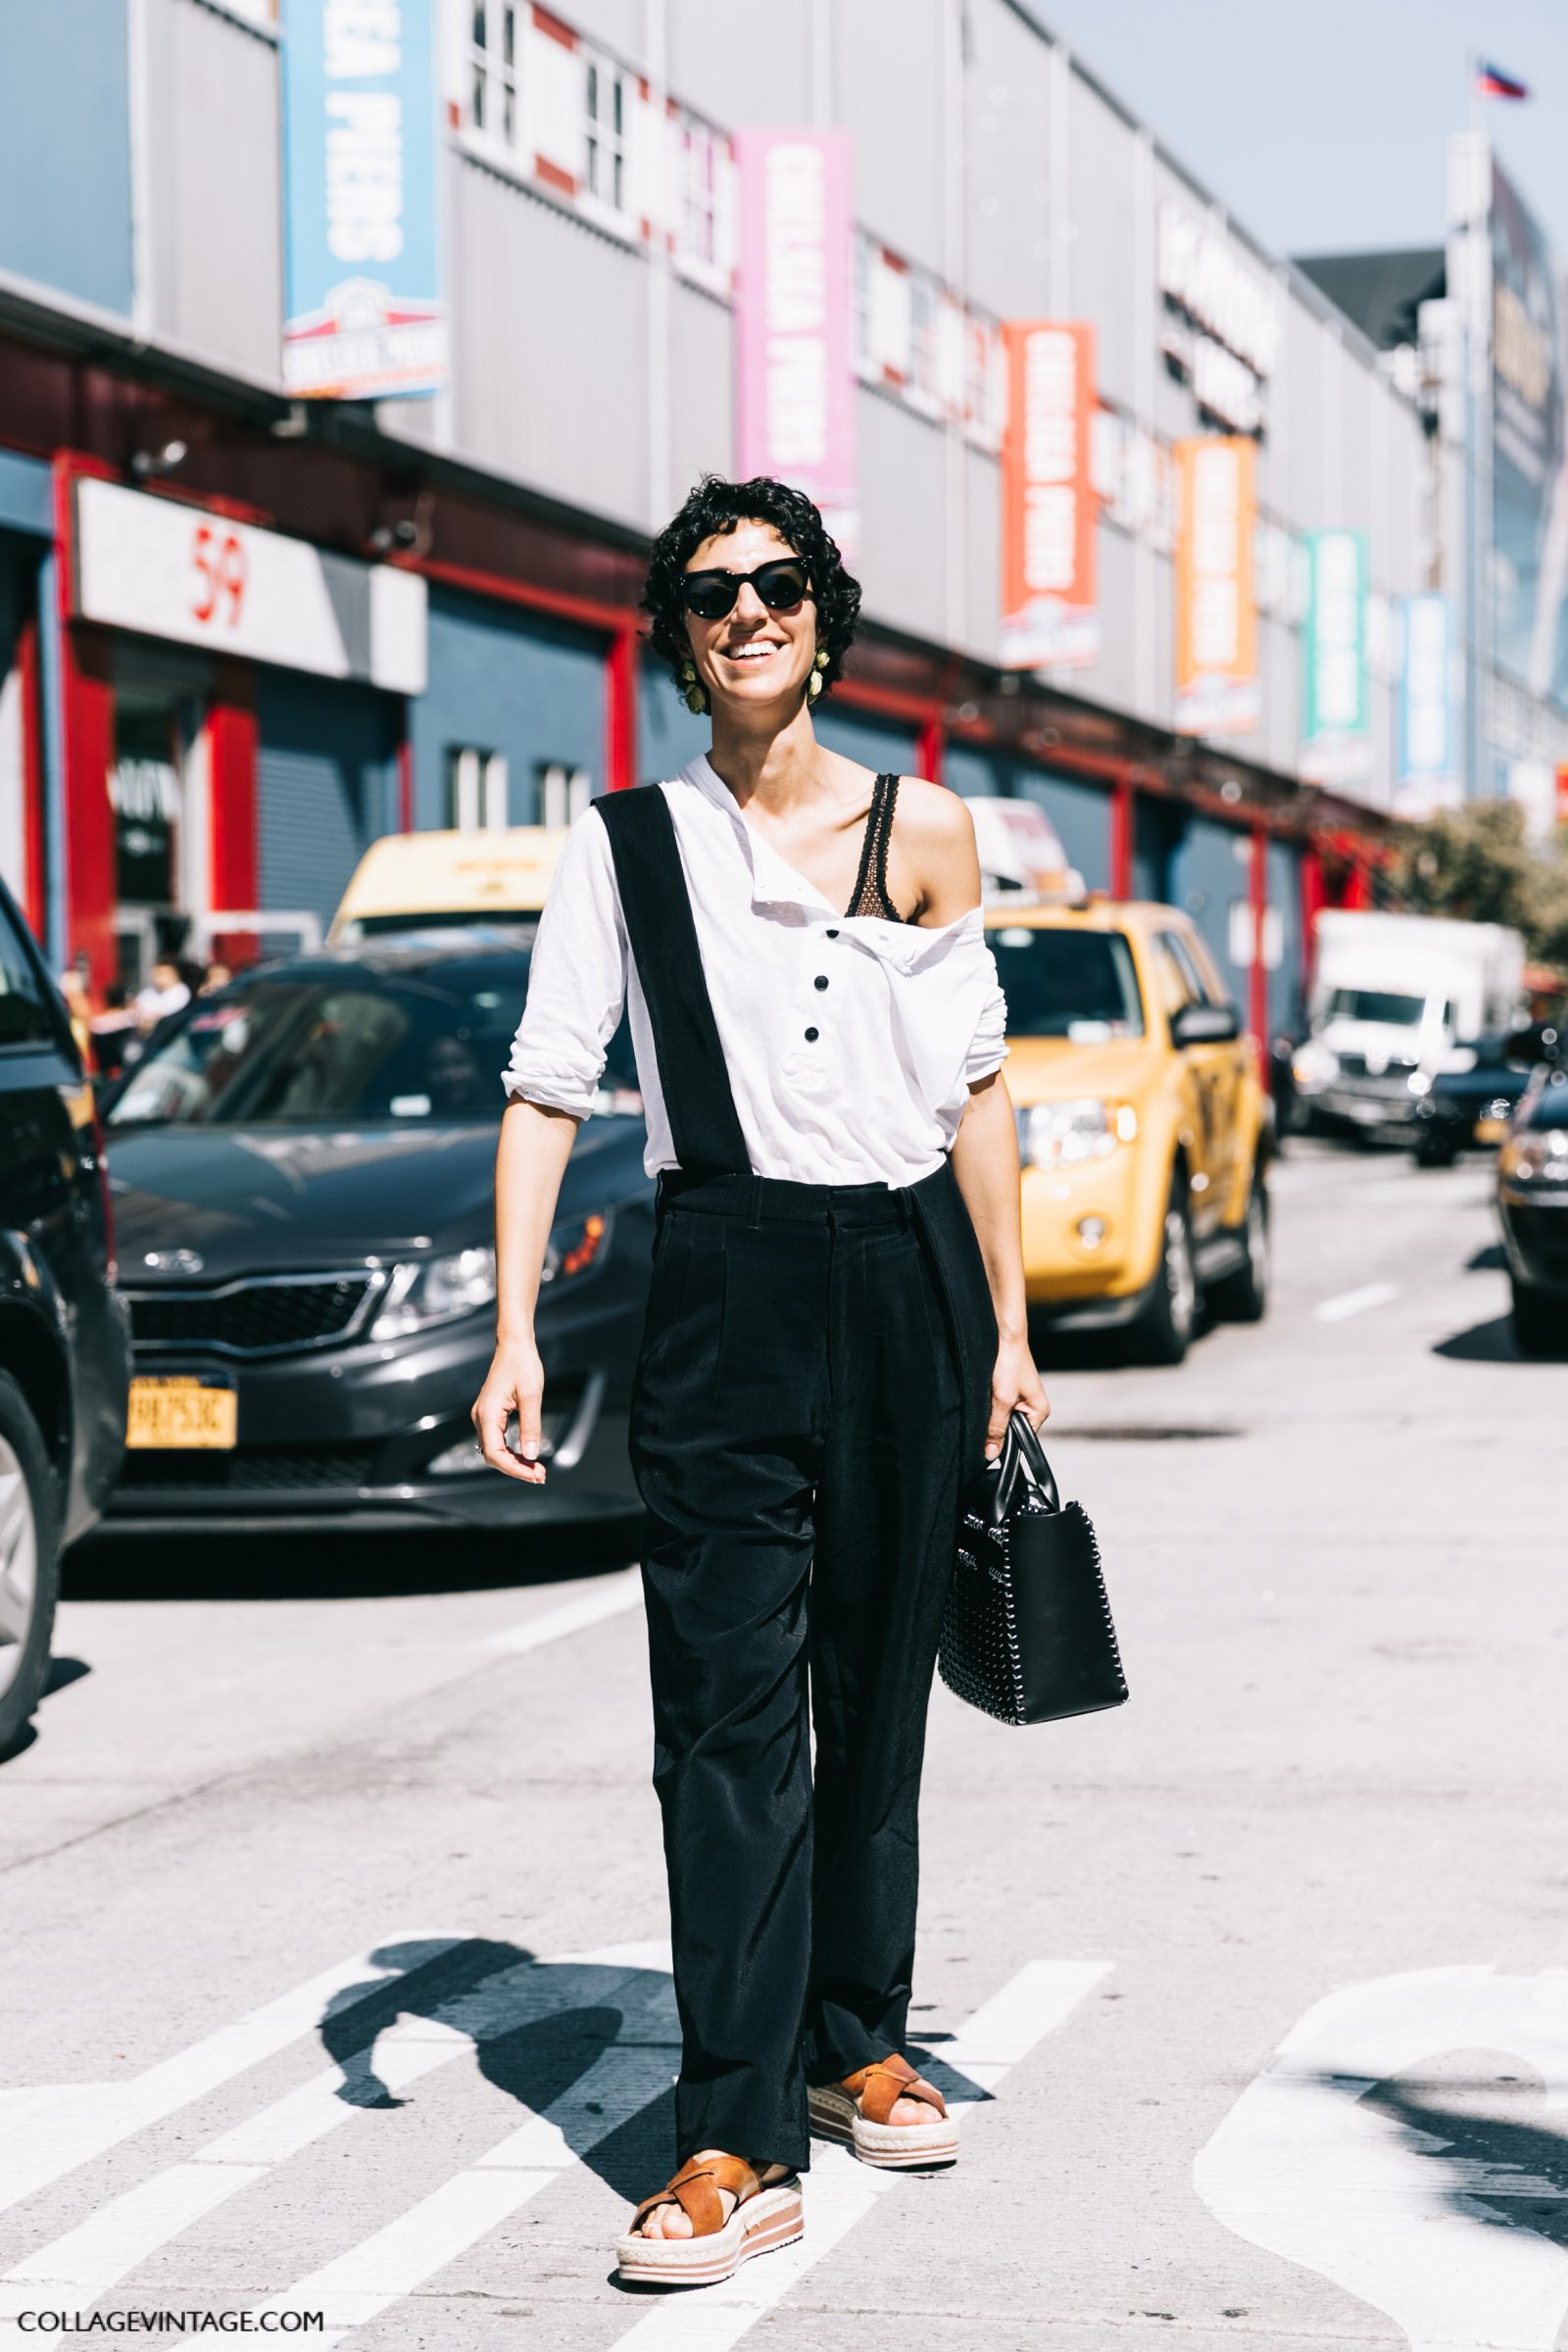 nyfw-new_york_fashion_week_ss17-street_style-outfits-collage_vintage-vintage-del_pozo-michael_kors-hugo_boss-123